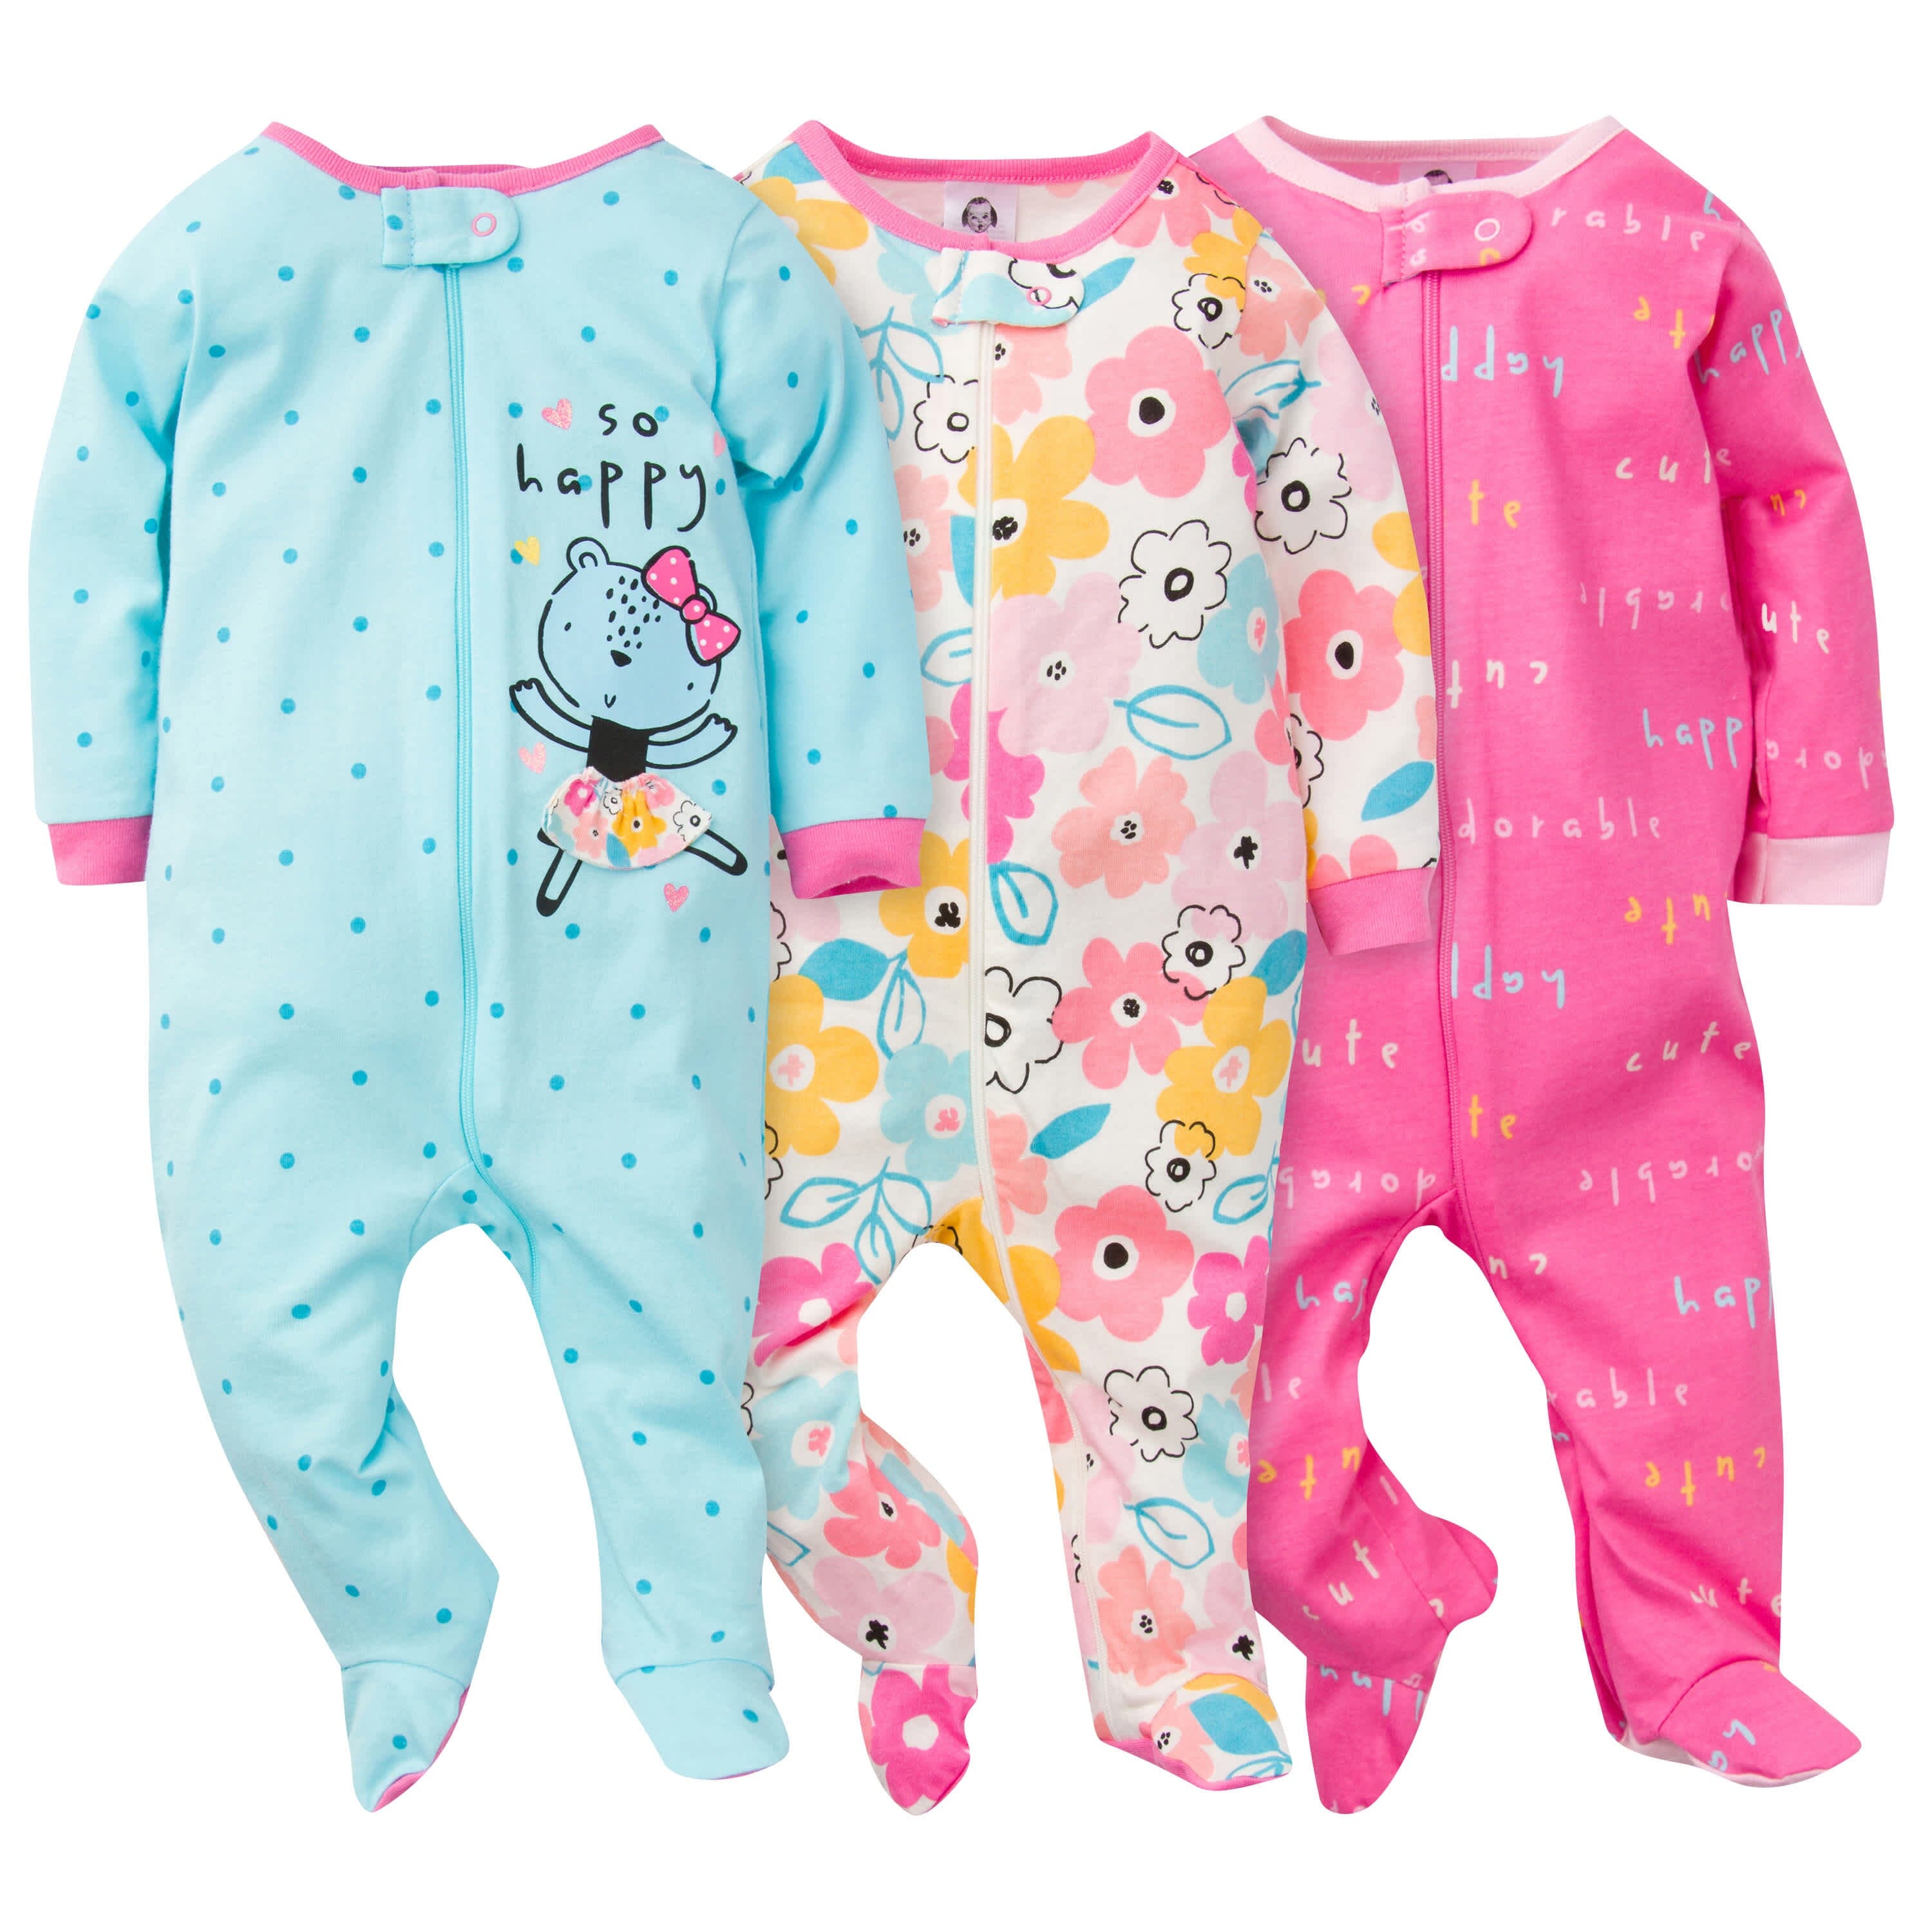 Find the best Gerber Childrenswear Coupon Codes, Coupons & Free